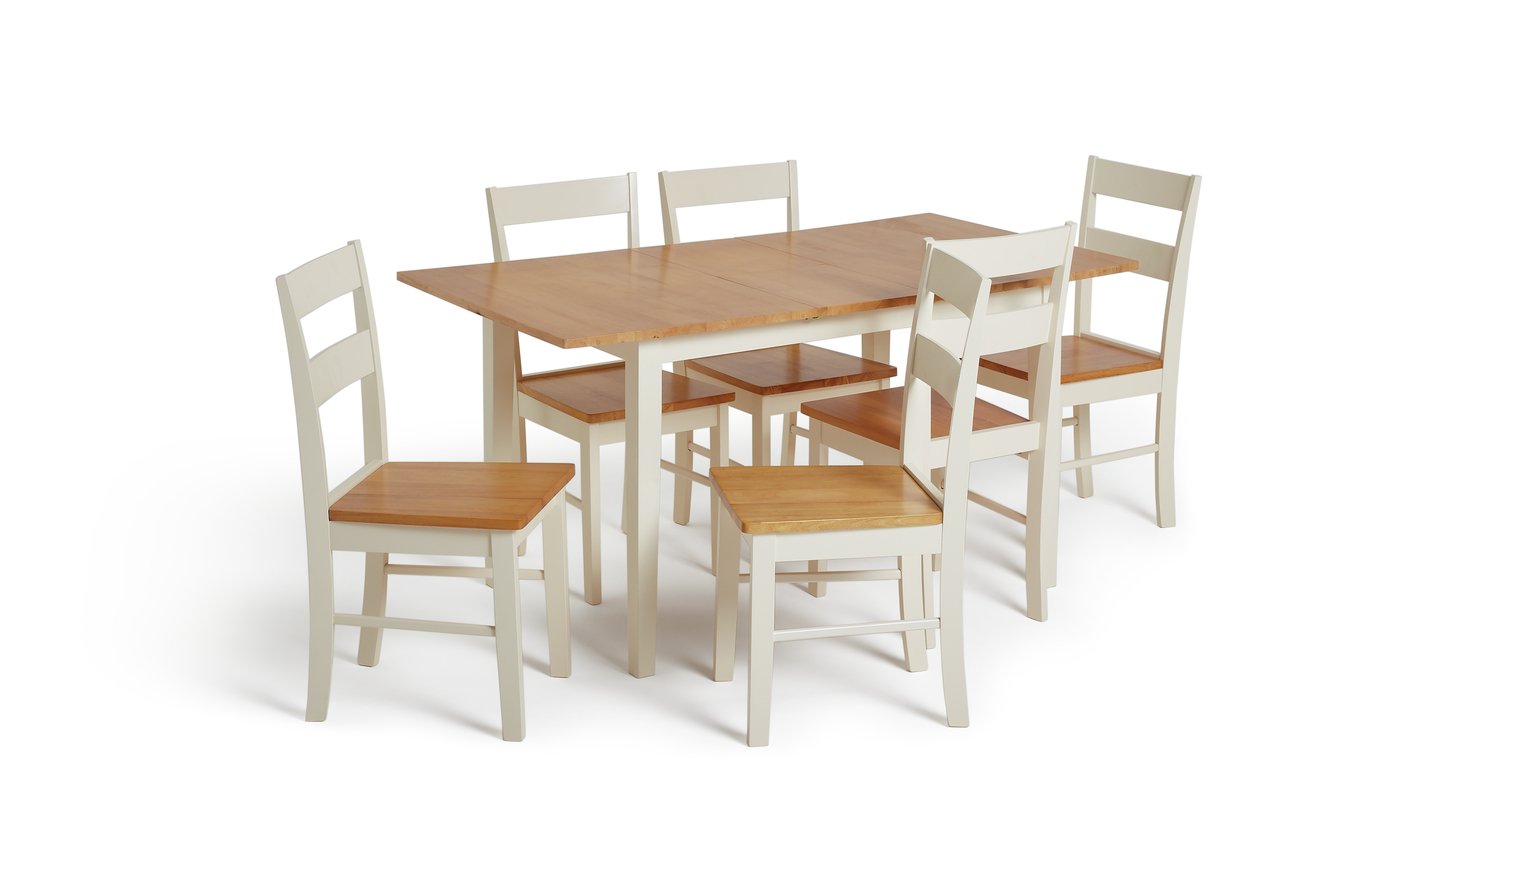 Habitat Chicago Solid Wood Extending Table & 6 Chairs